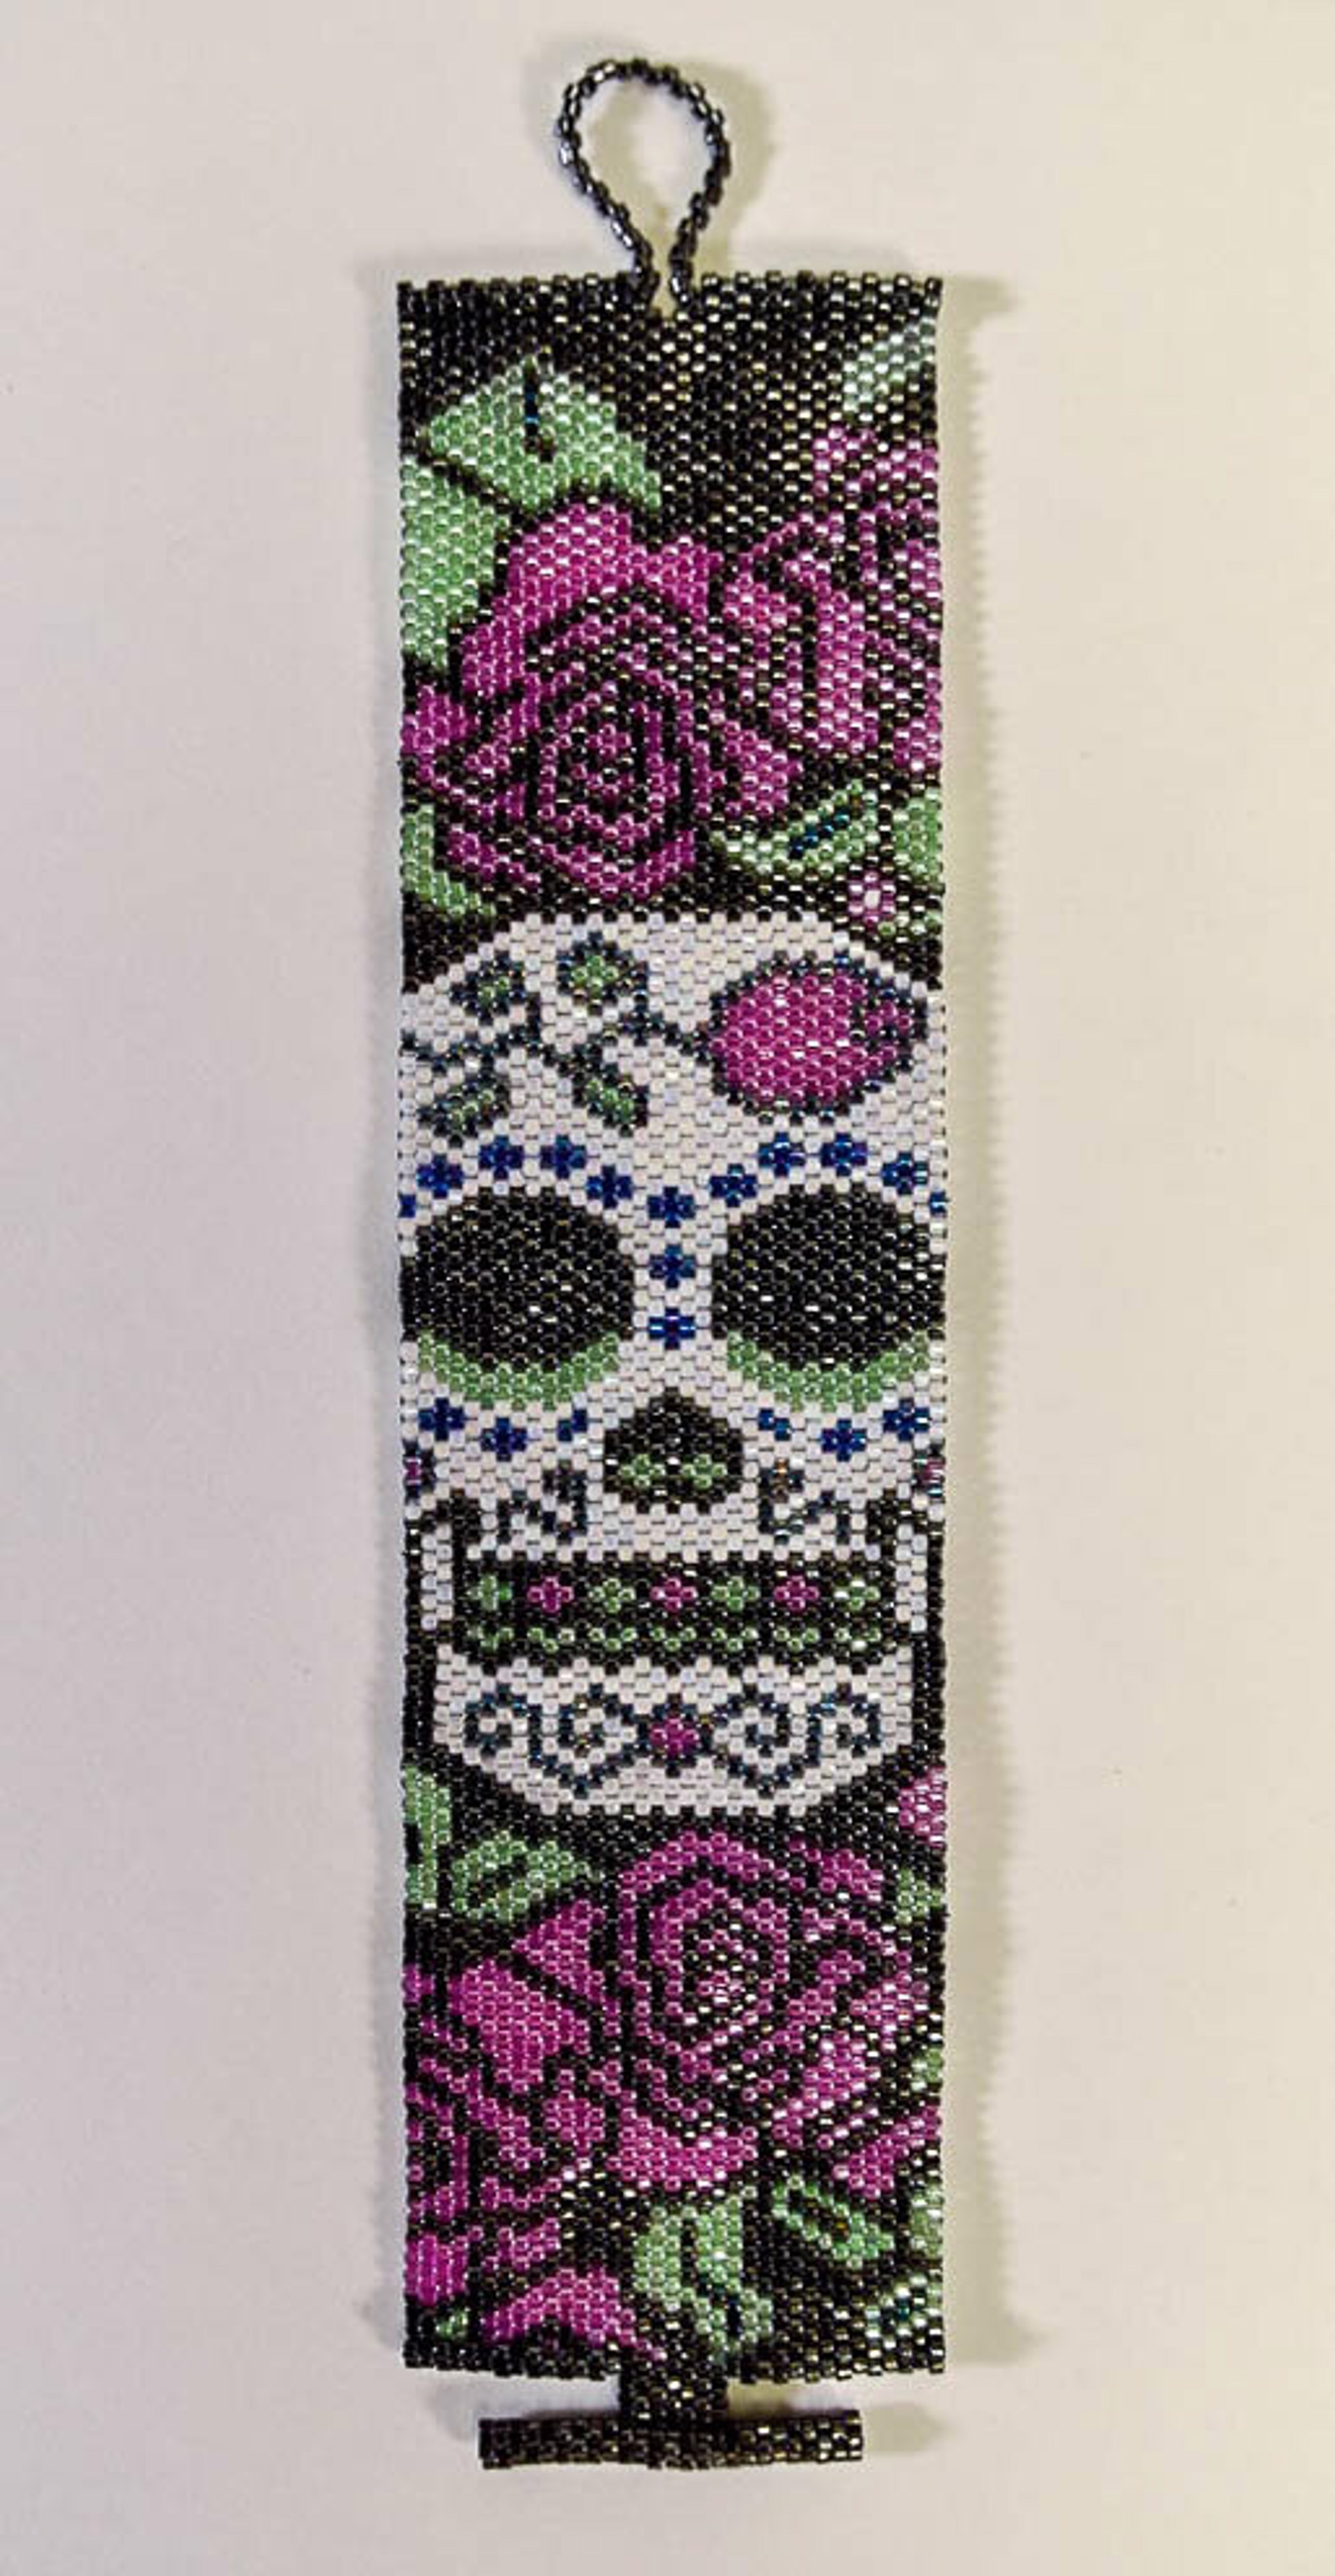 Sugar Skull and Rose Bracelet by William Donnell